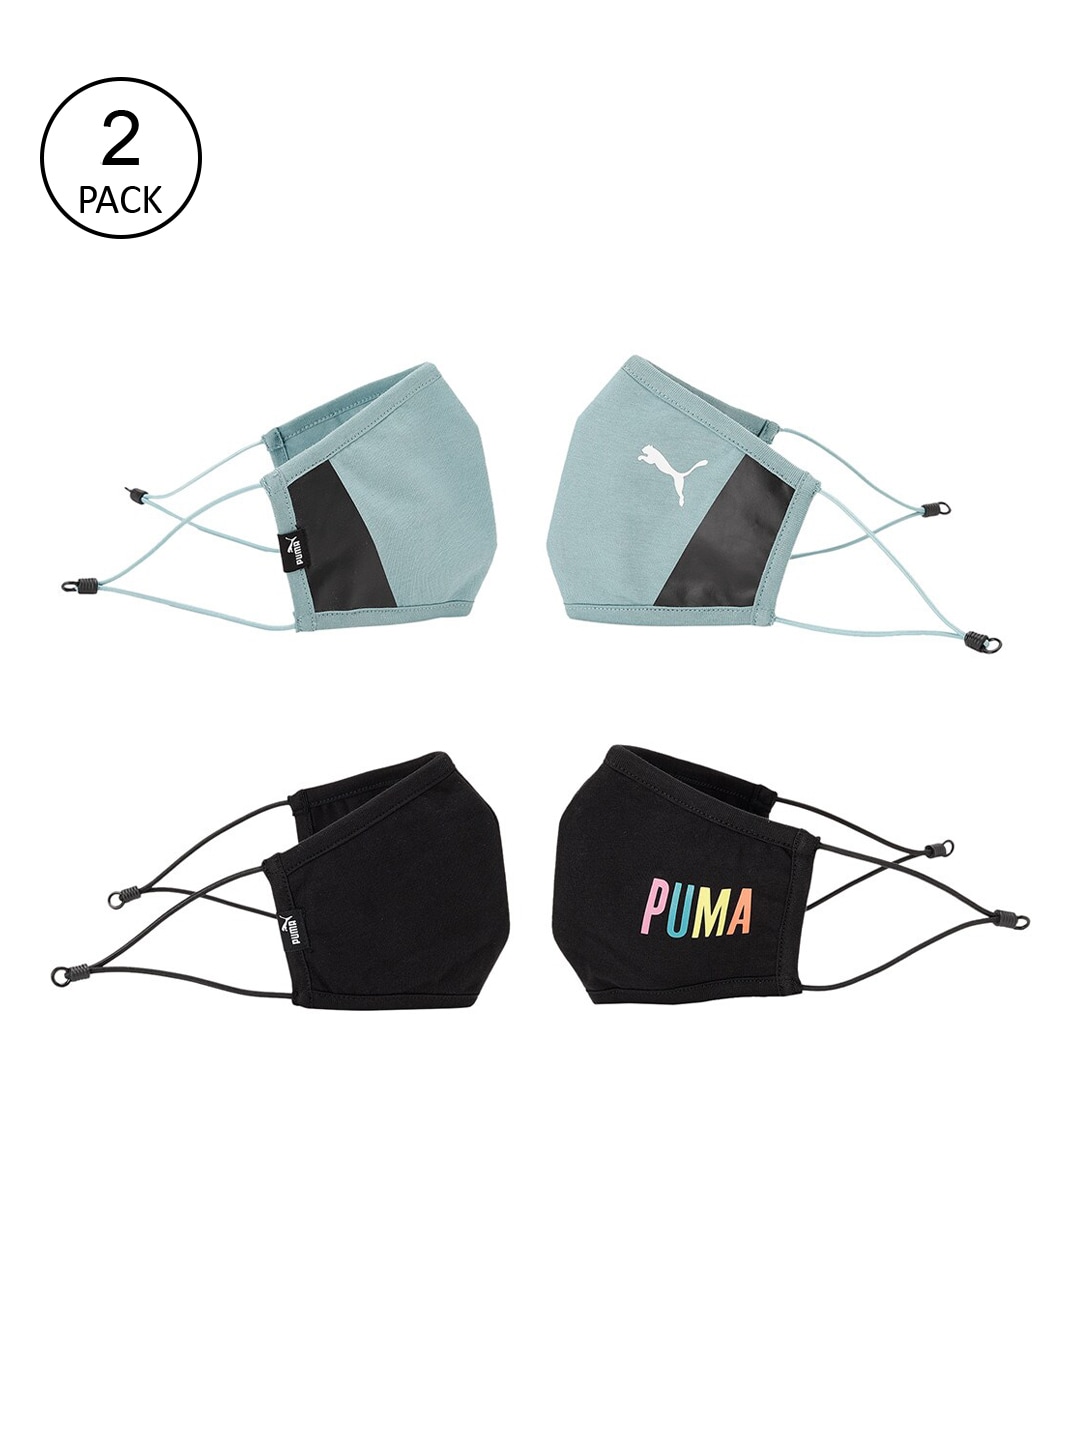 Puma Pack of 2 Black & Pastel Blue Reusable Face Mask Price in India